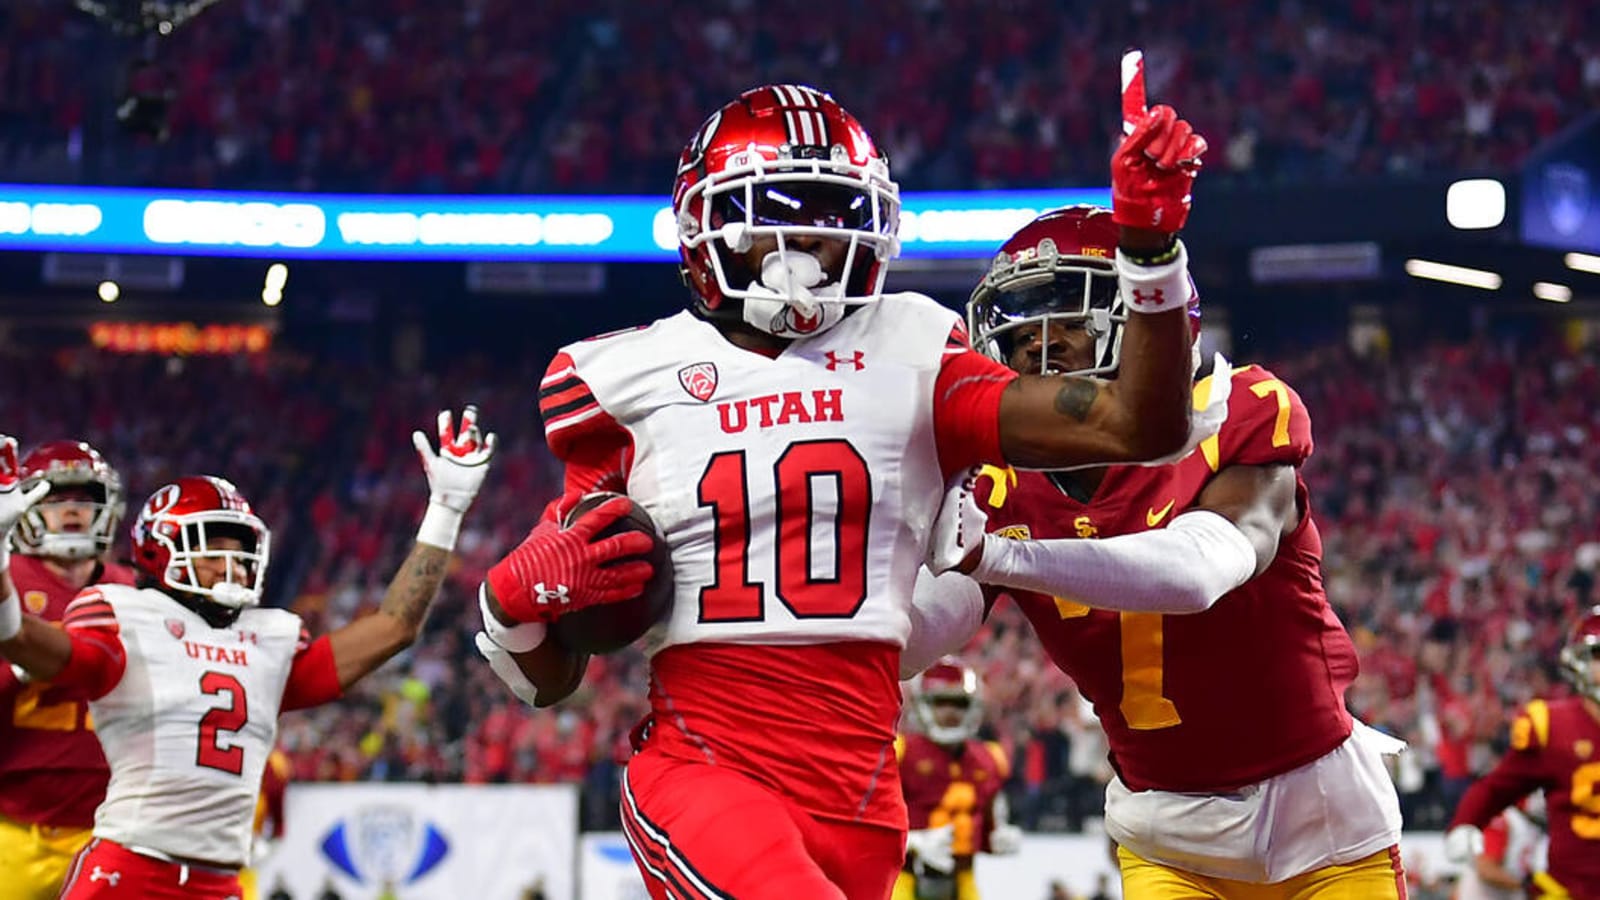 Utah stuns USC in Pac-12 title game, throwing CFP in disarray